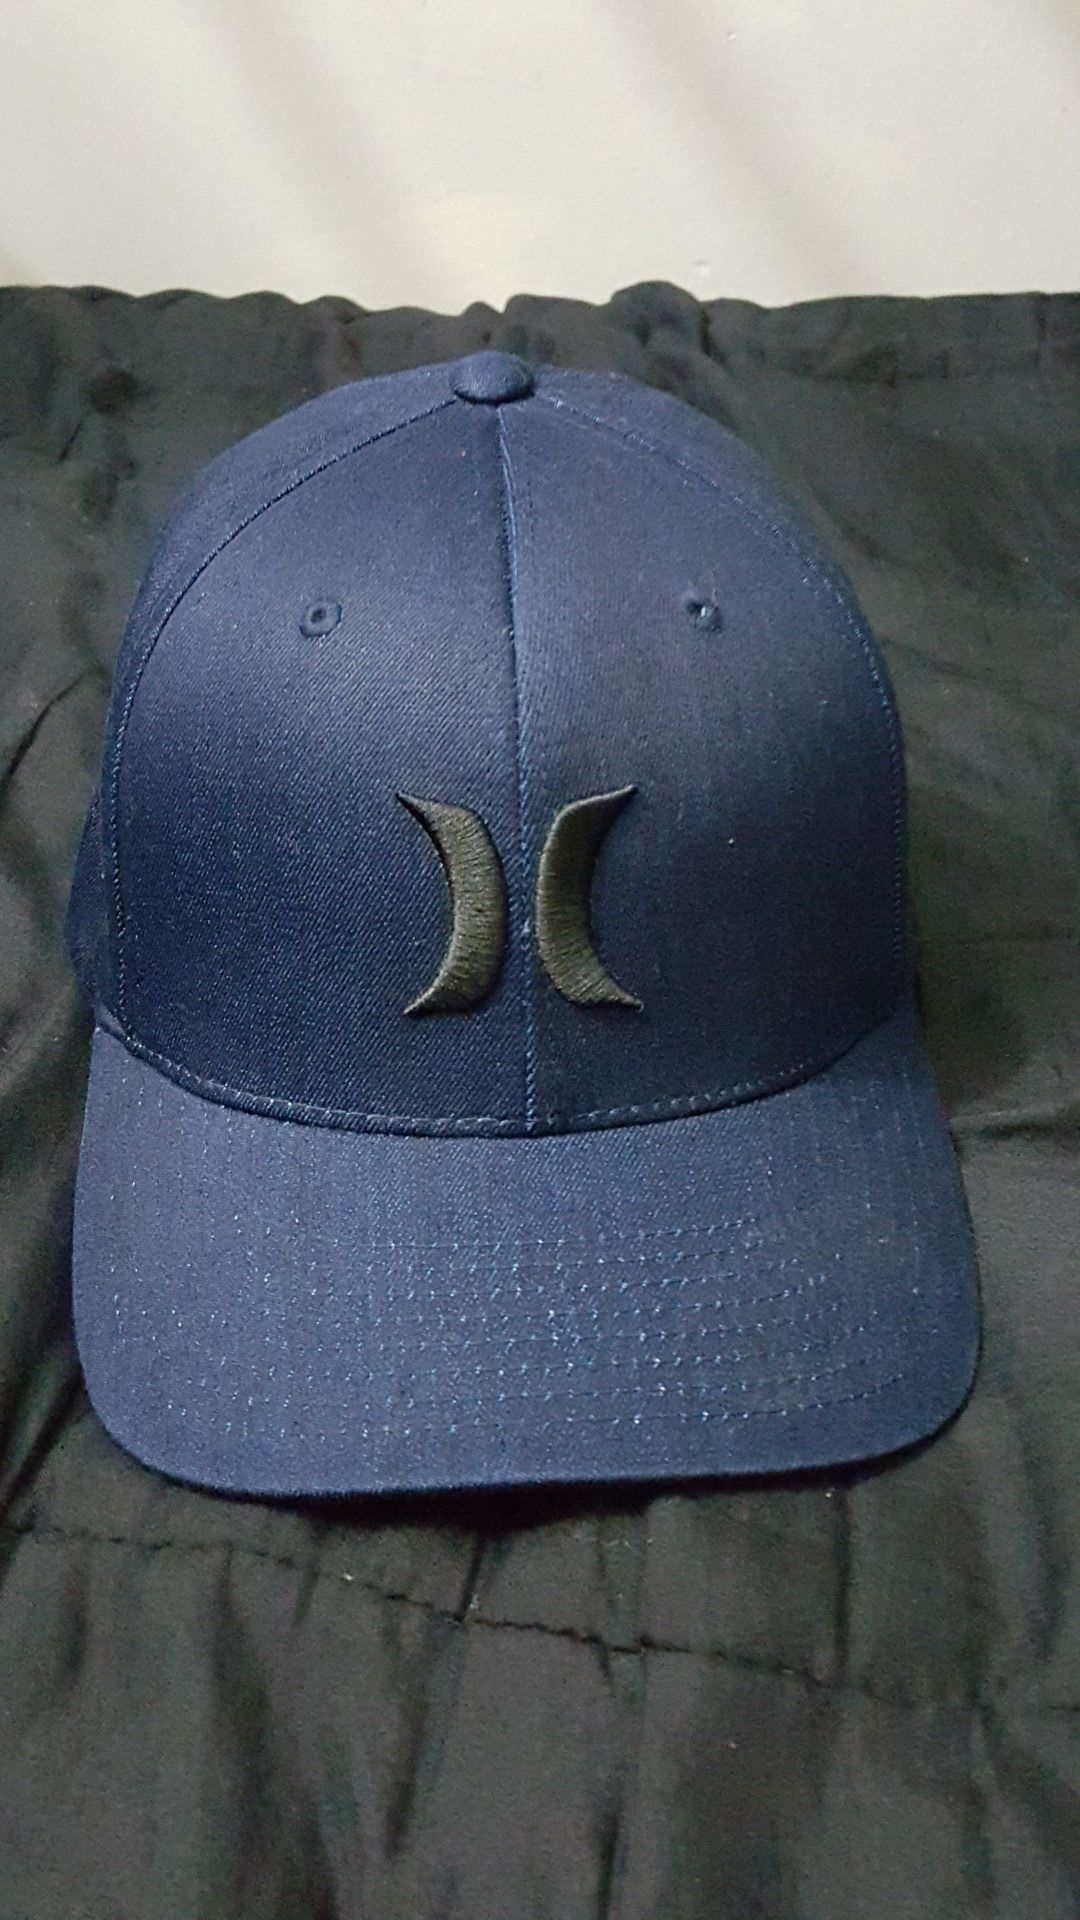 HURLEY FLEX FIT HAT SIZE SMALL/MEDIUM LIMITED EDITION DARK NAVY BLUE BRAND NEW WITH OUT TAGS SERIOUS BUYER'S MAKE ME AN OFFER